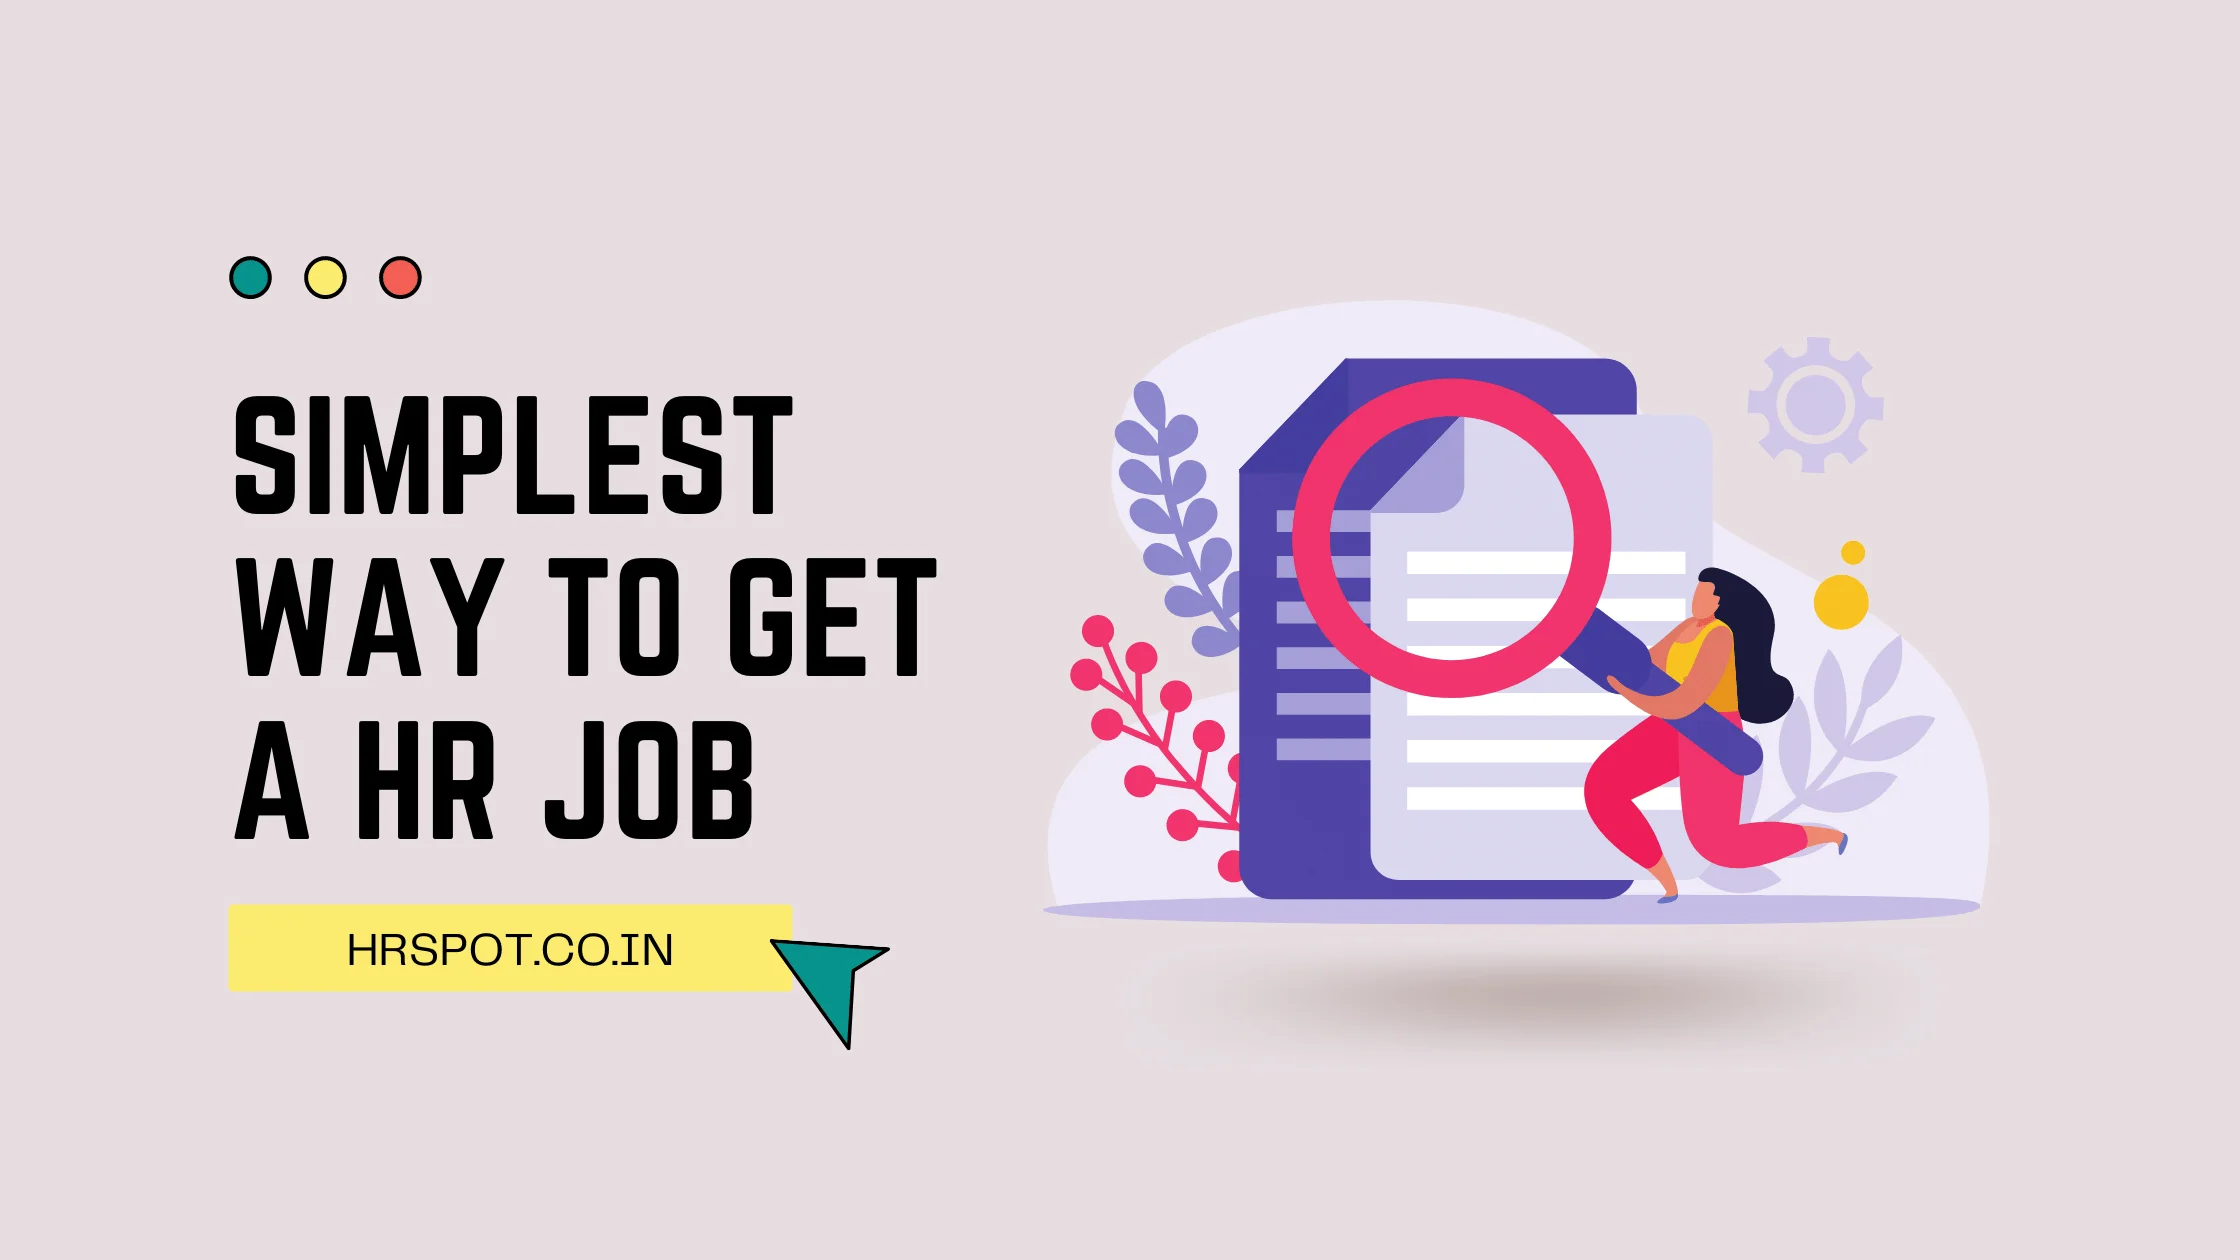 Simplest Way to Get A HR JOB